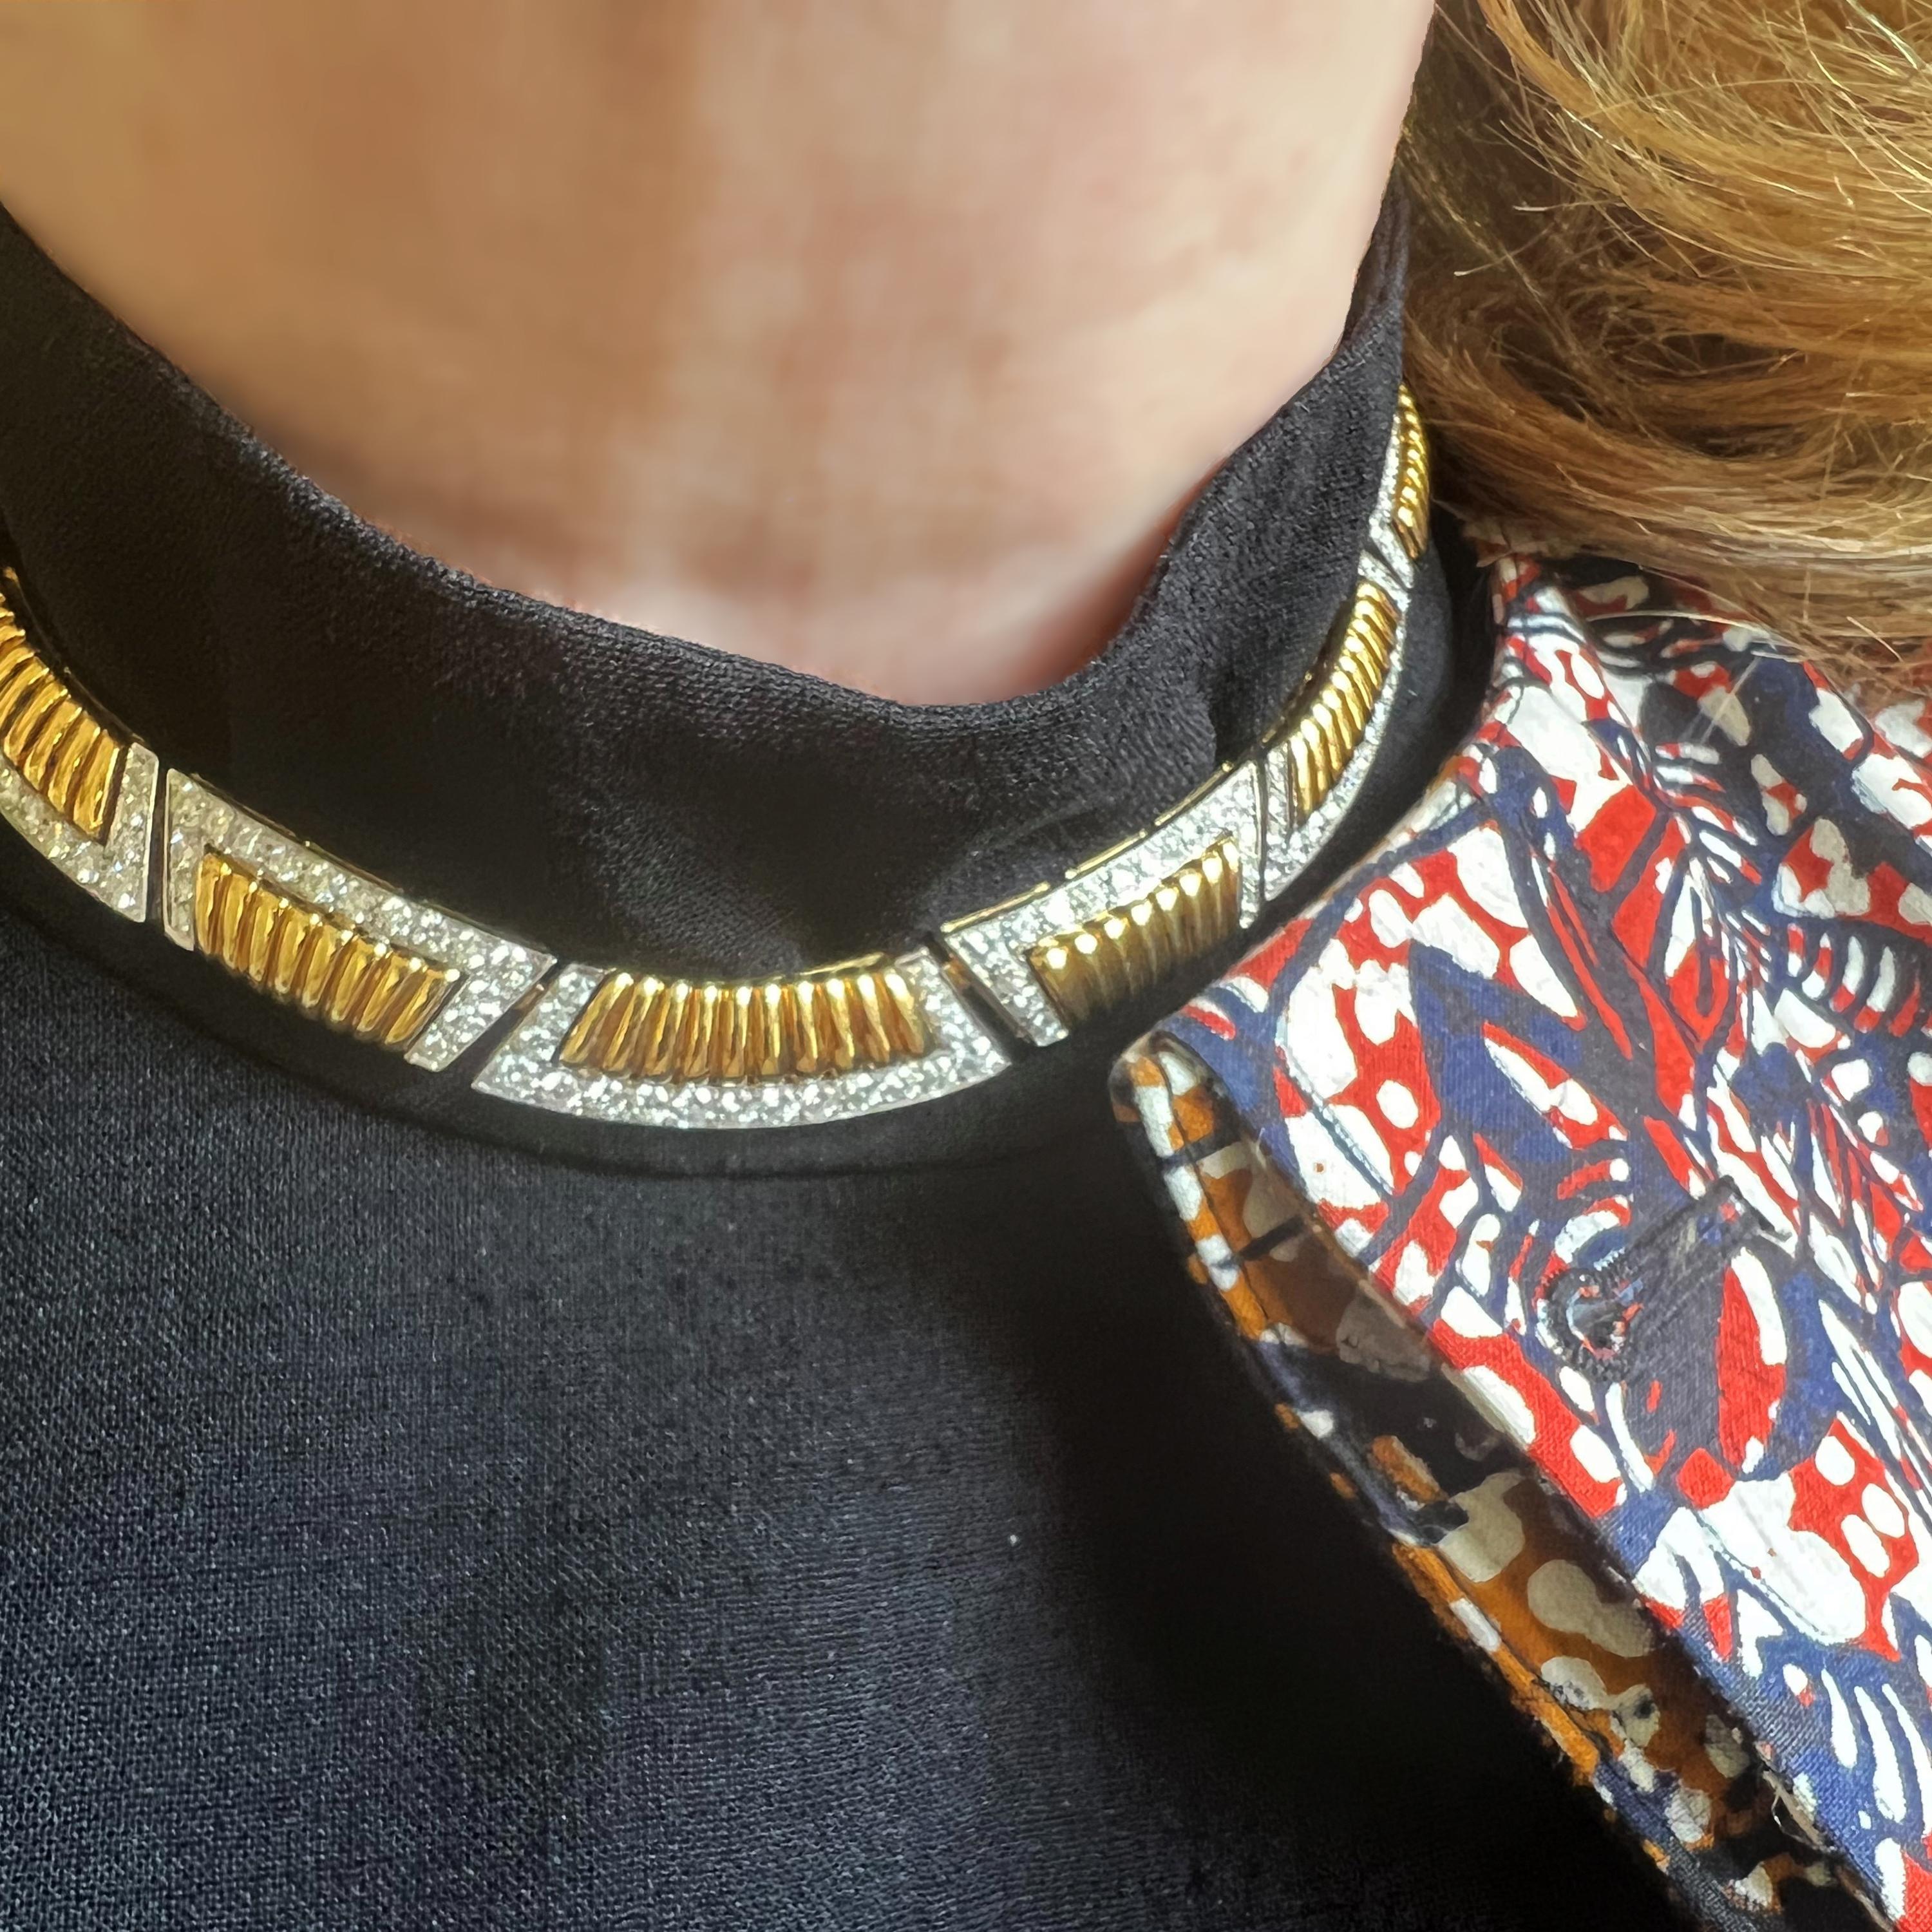 An Adler diamond and gold necklace, with yellow gold, alternating, curved trapezoid shaped, ribbed links, with alternating outer and inner edges set with round brilliant-cut diamonds, in white gold grain settings, mounted in 18ct gold, signed